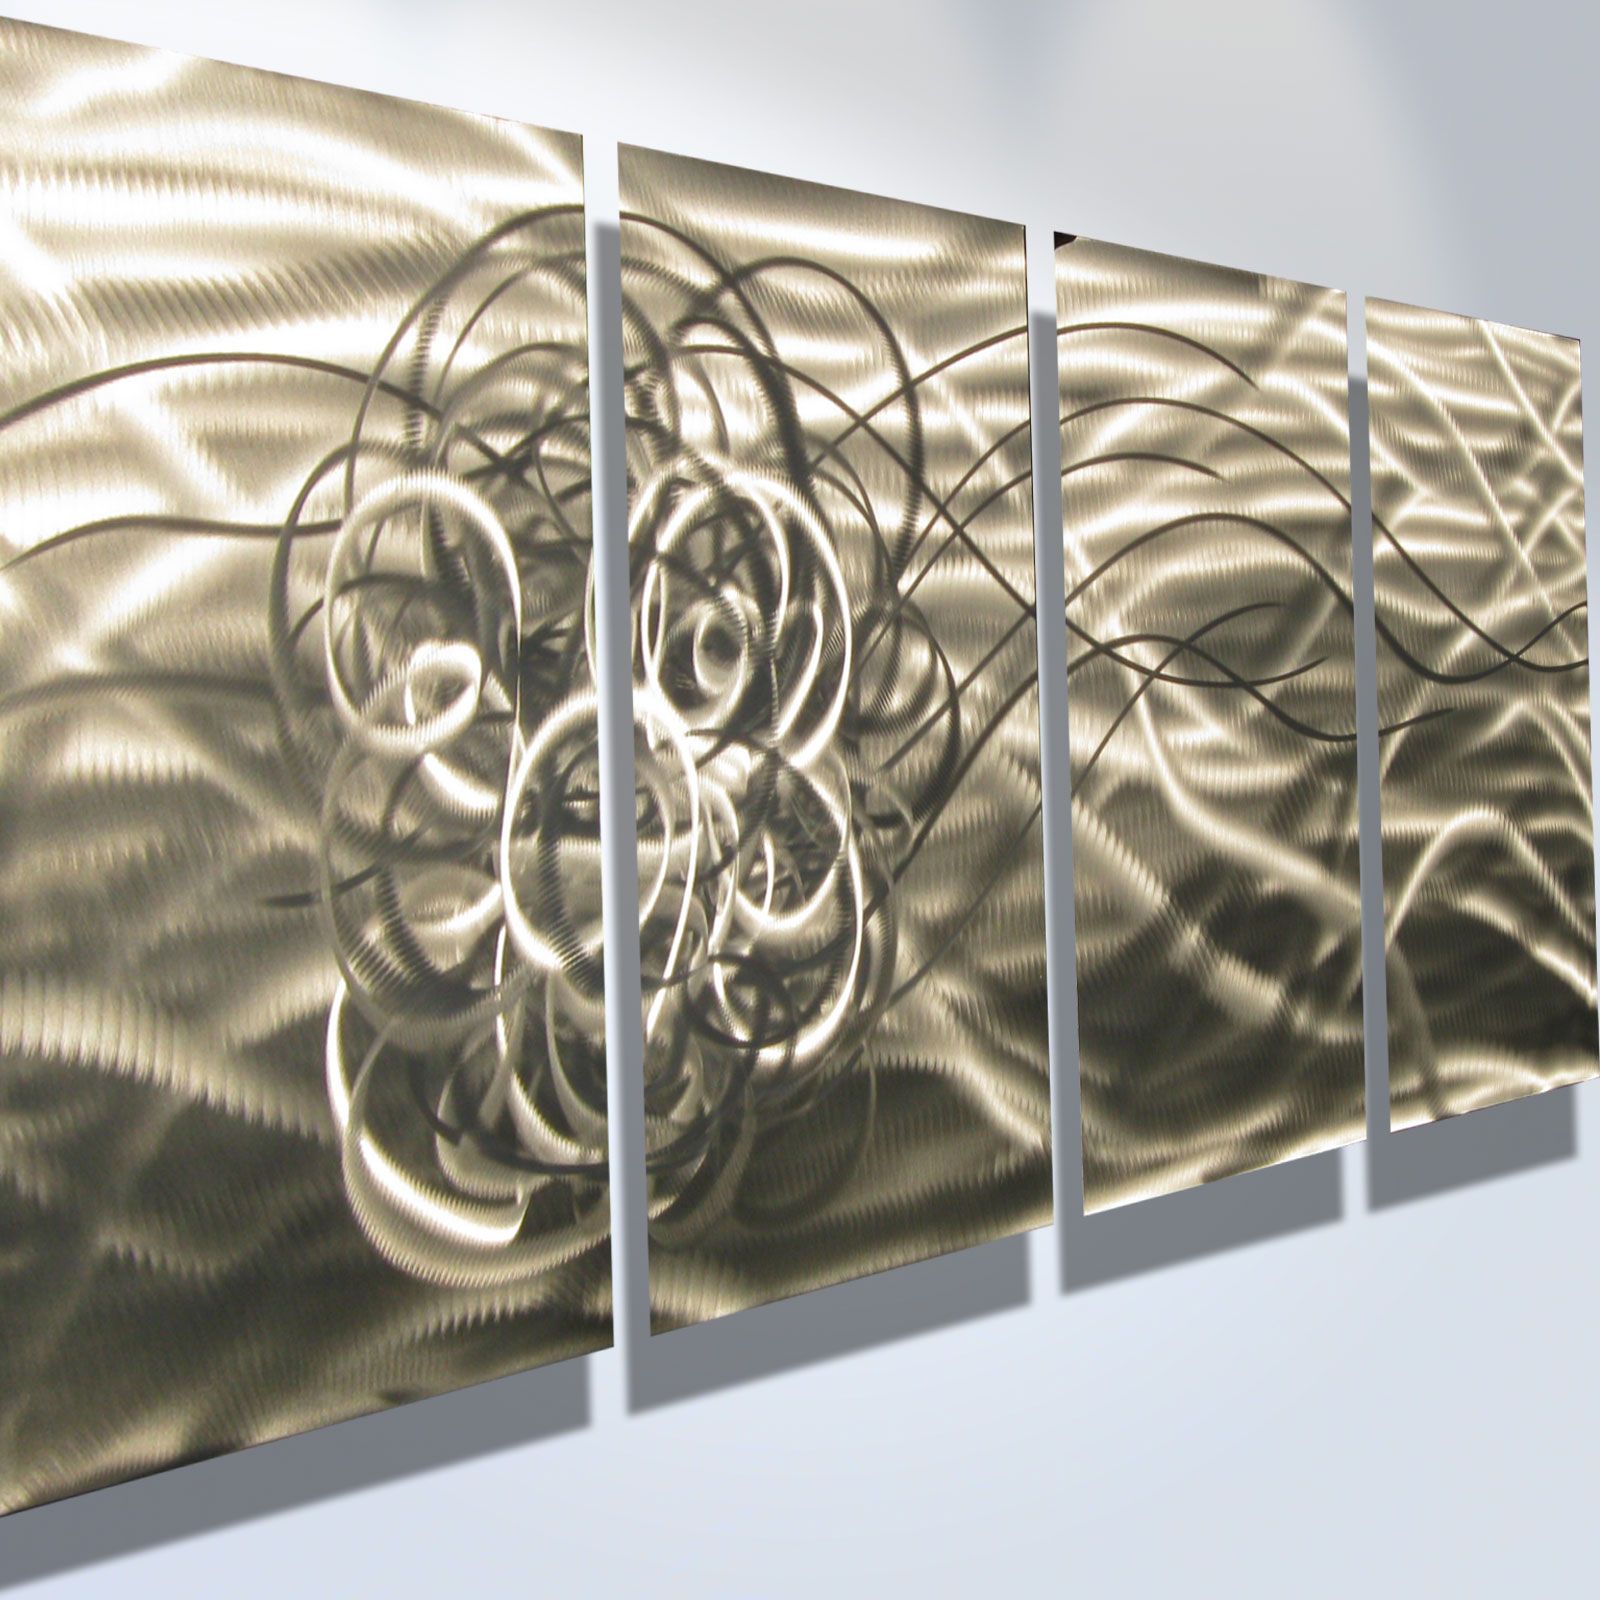 Torrent  Abstract Metal Wall Art Contemporary Modern Decor On Storenvy For Current Sparks Metal Wall Art (View 11 of 20)